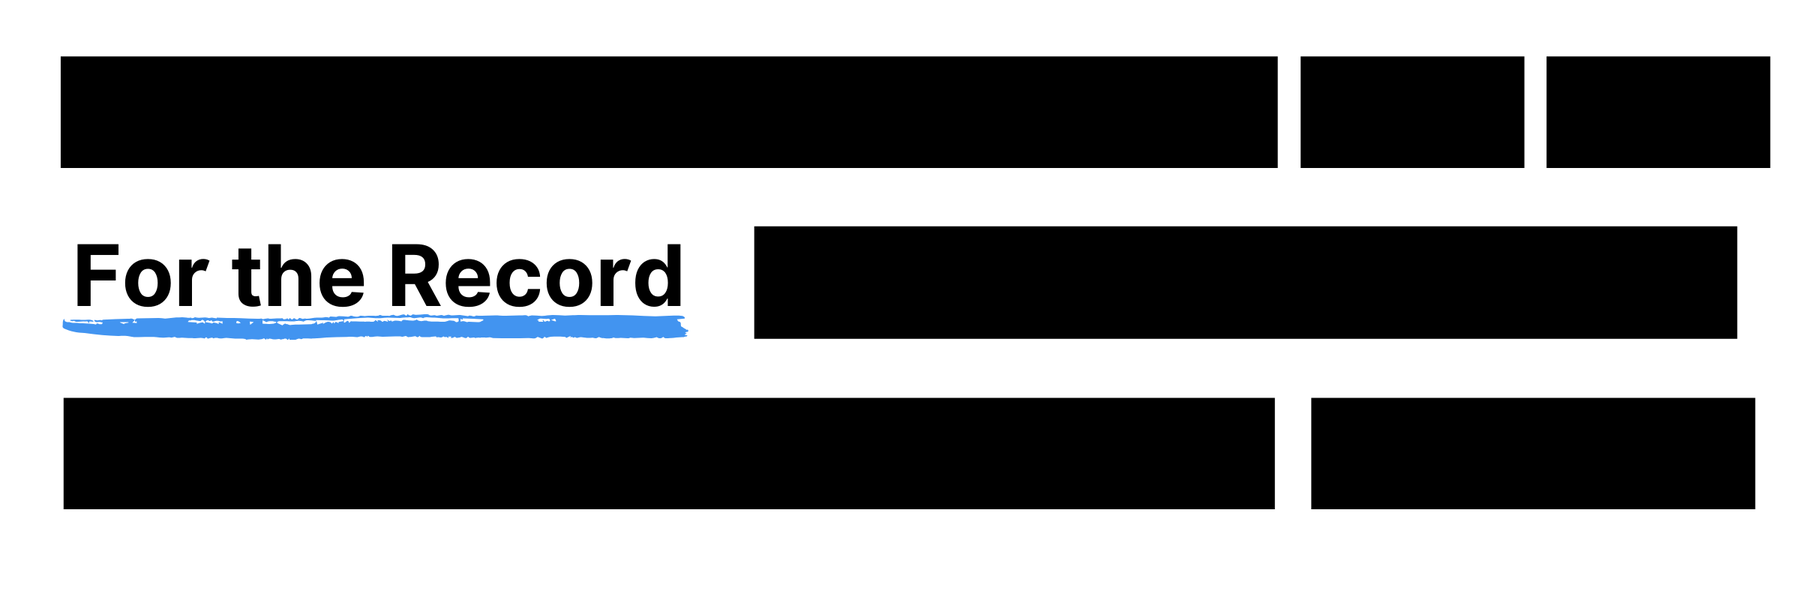 Black bars surrounding the words For the Record